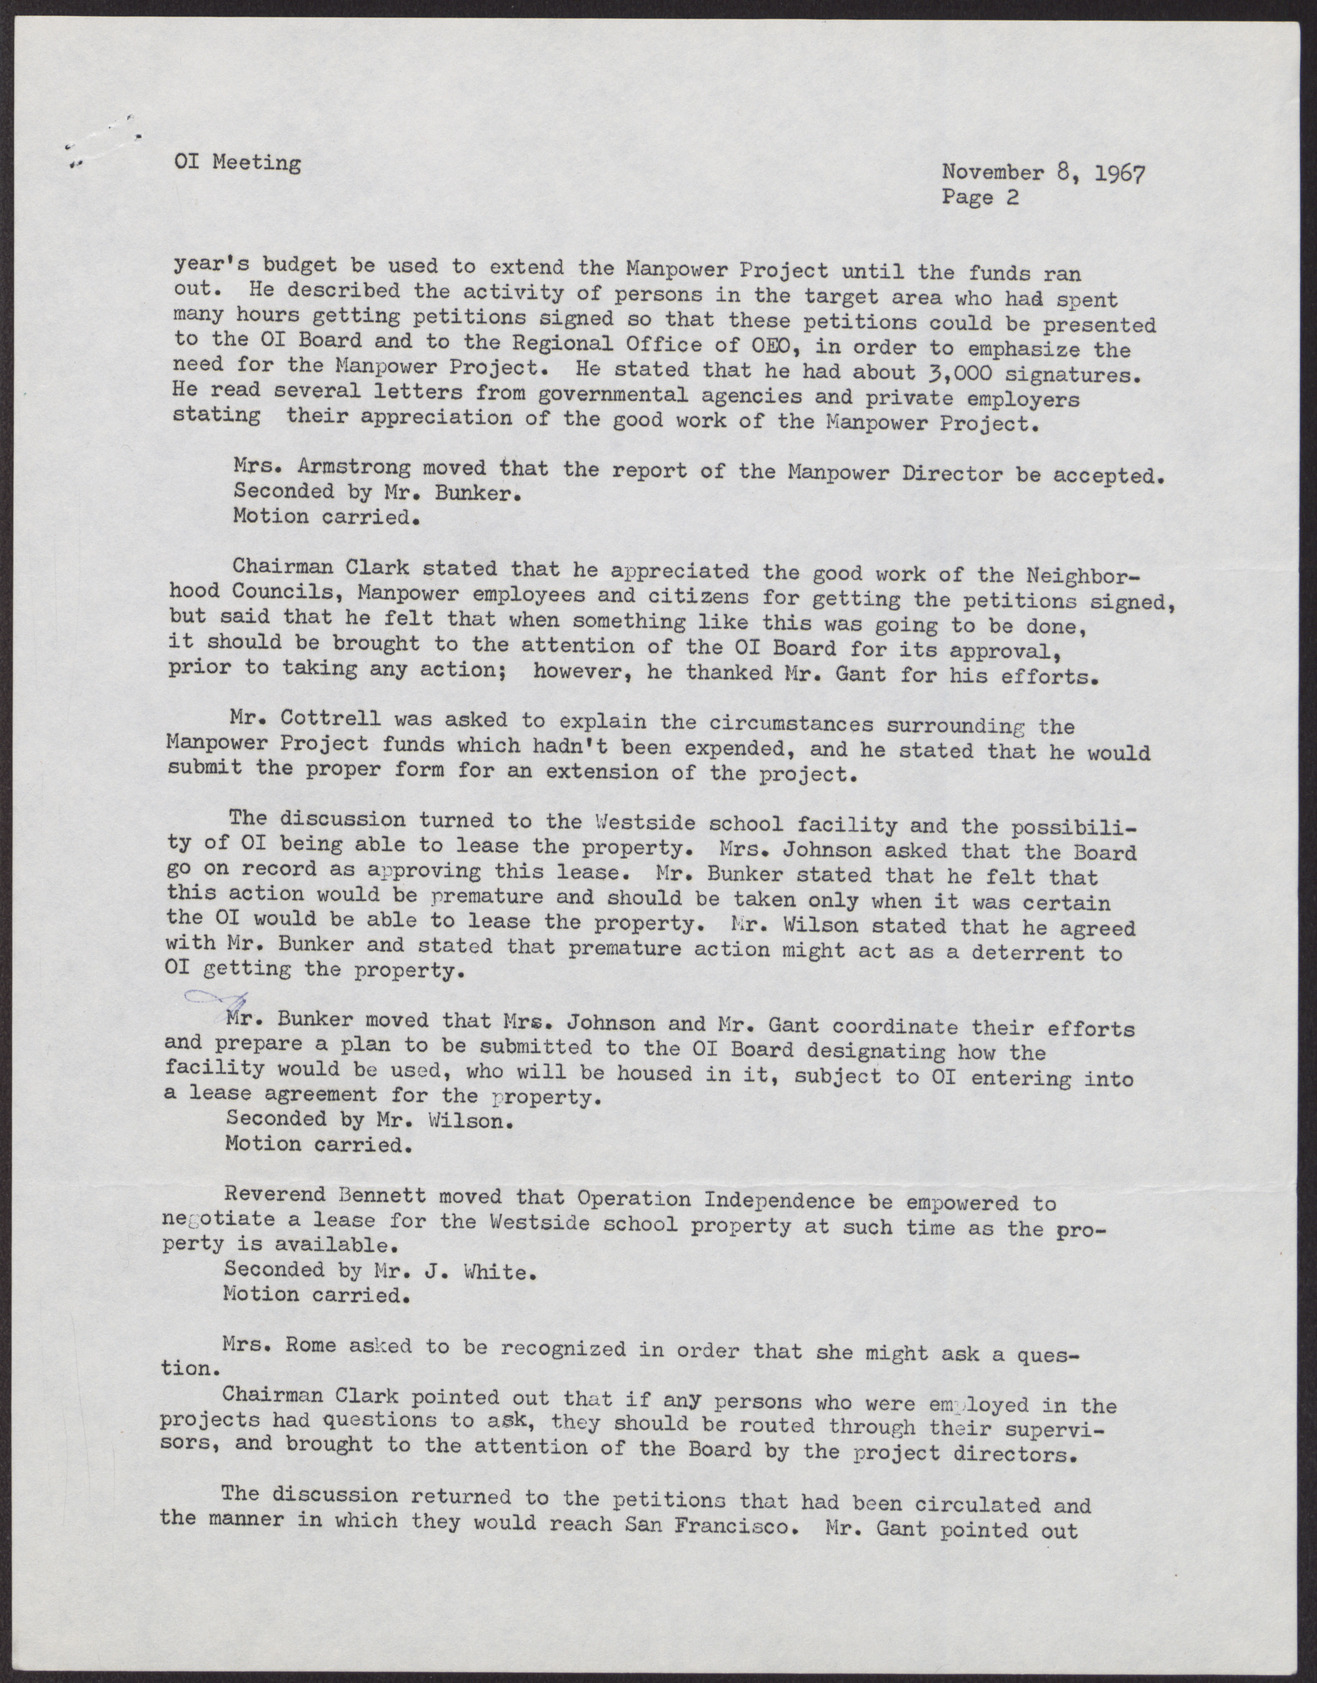 Minutes from Operation Independence Regular Board Meeting (4 pages), November 8, 1967, page 2